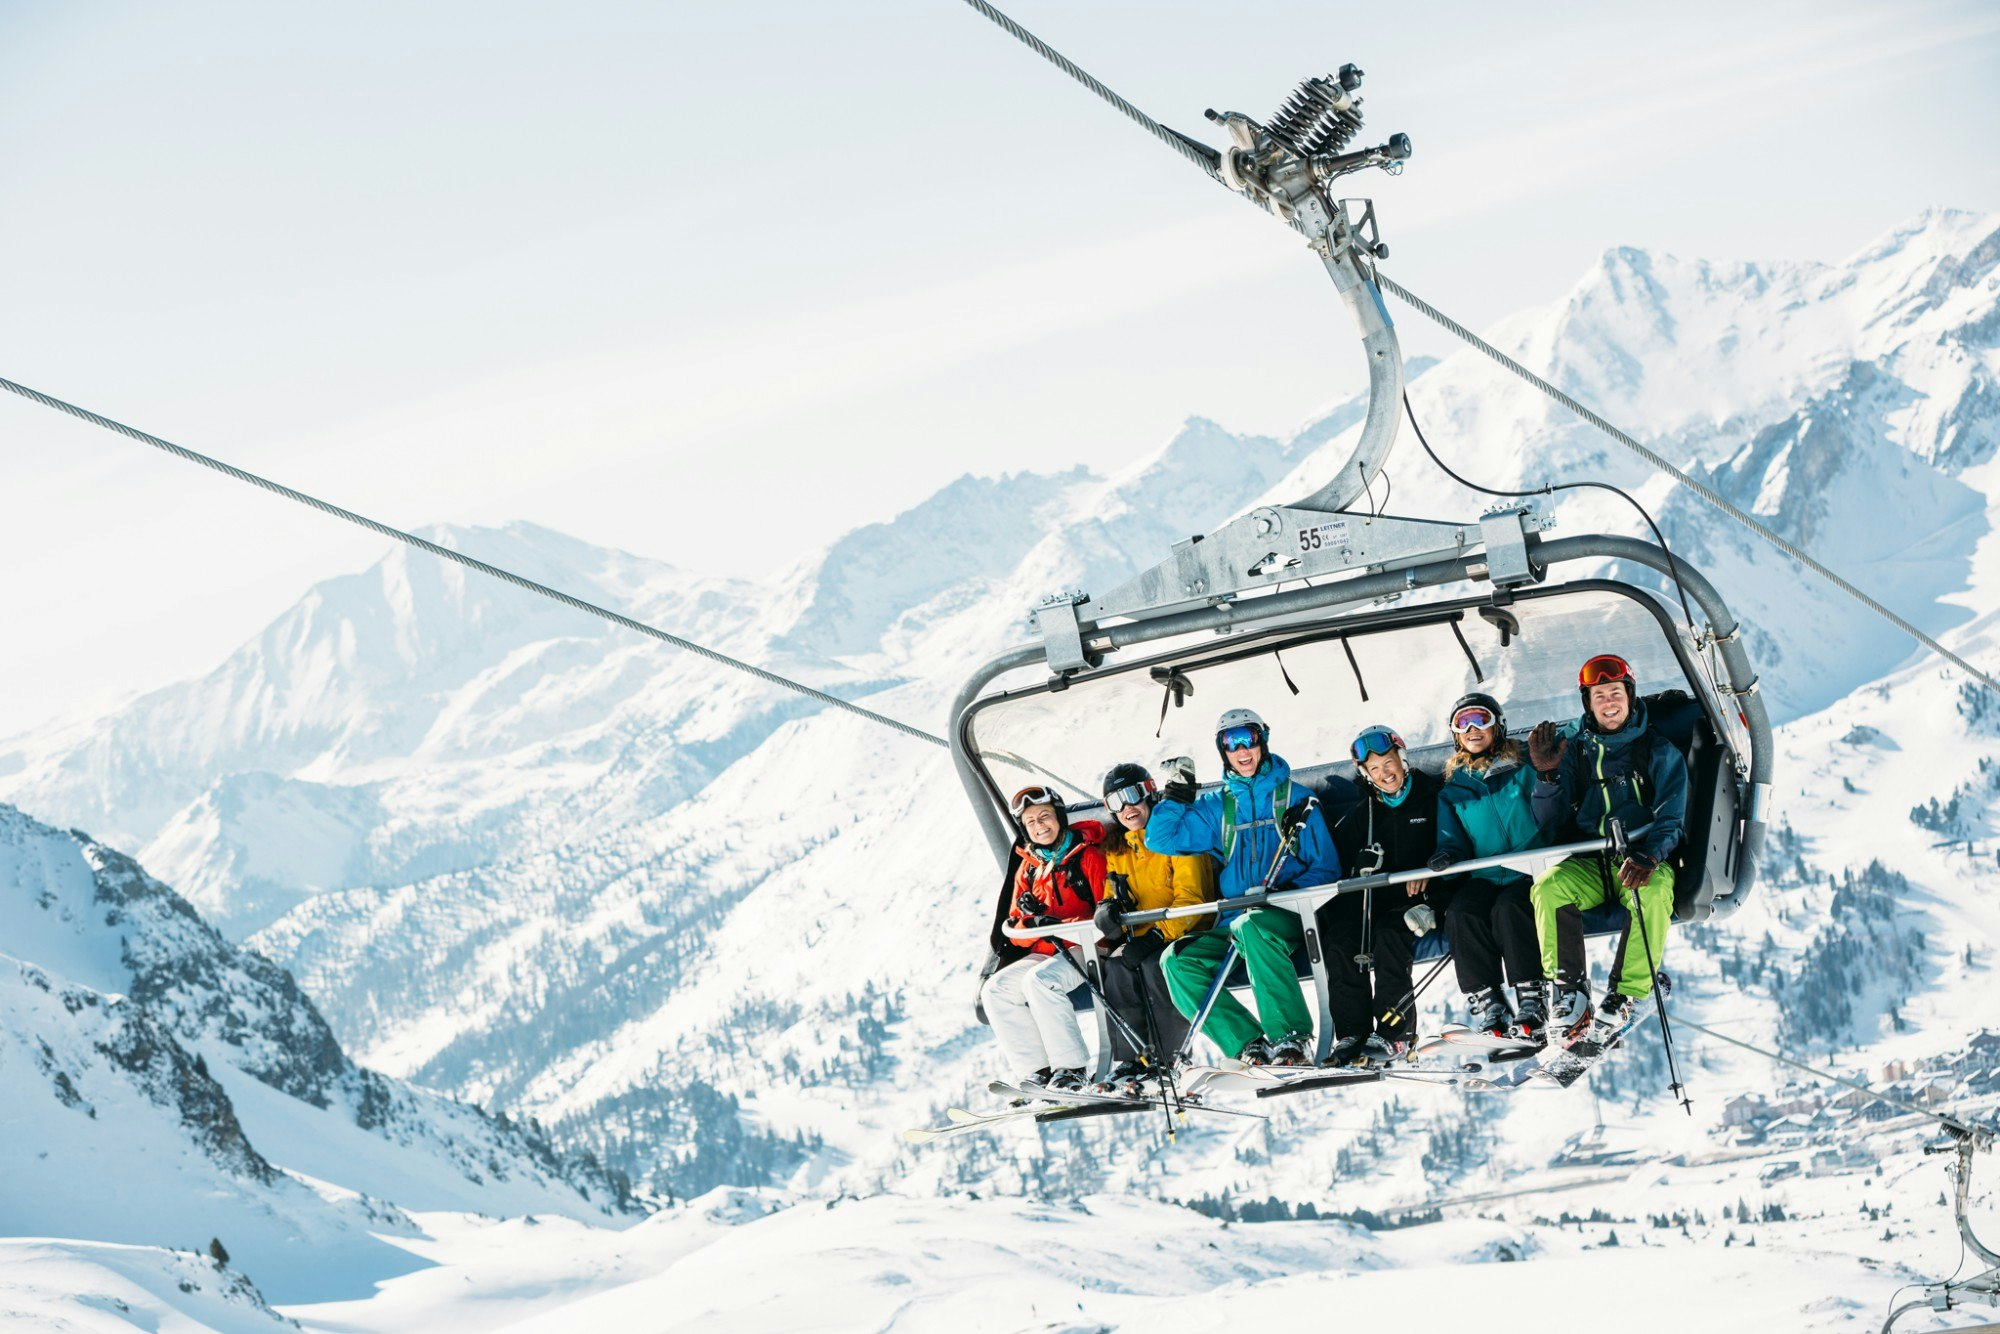 Six people being transported in a ski lift over a snow-covered landscape